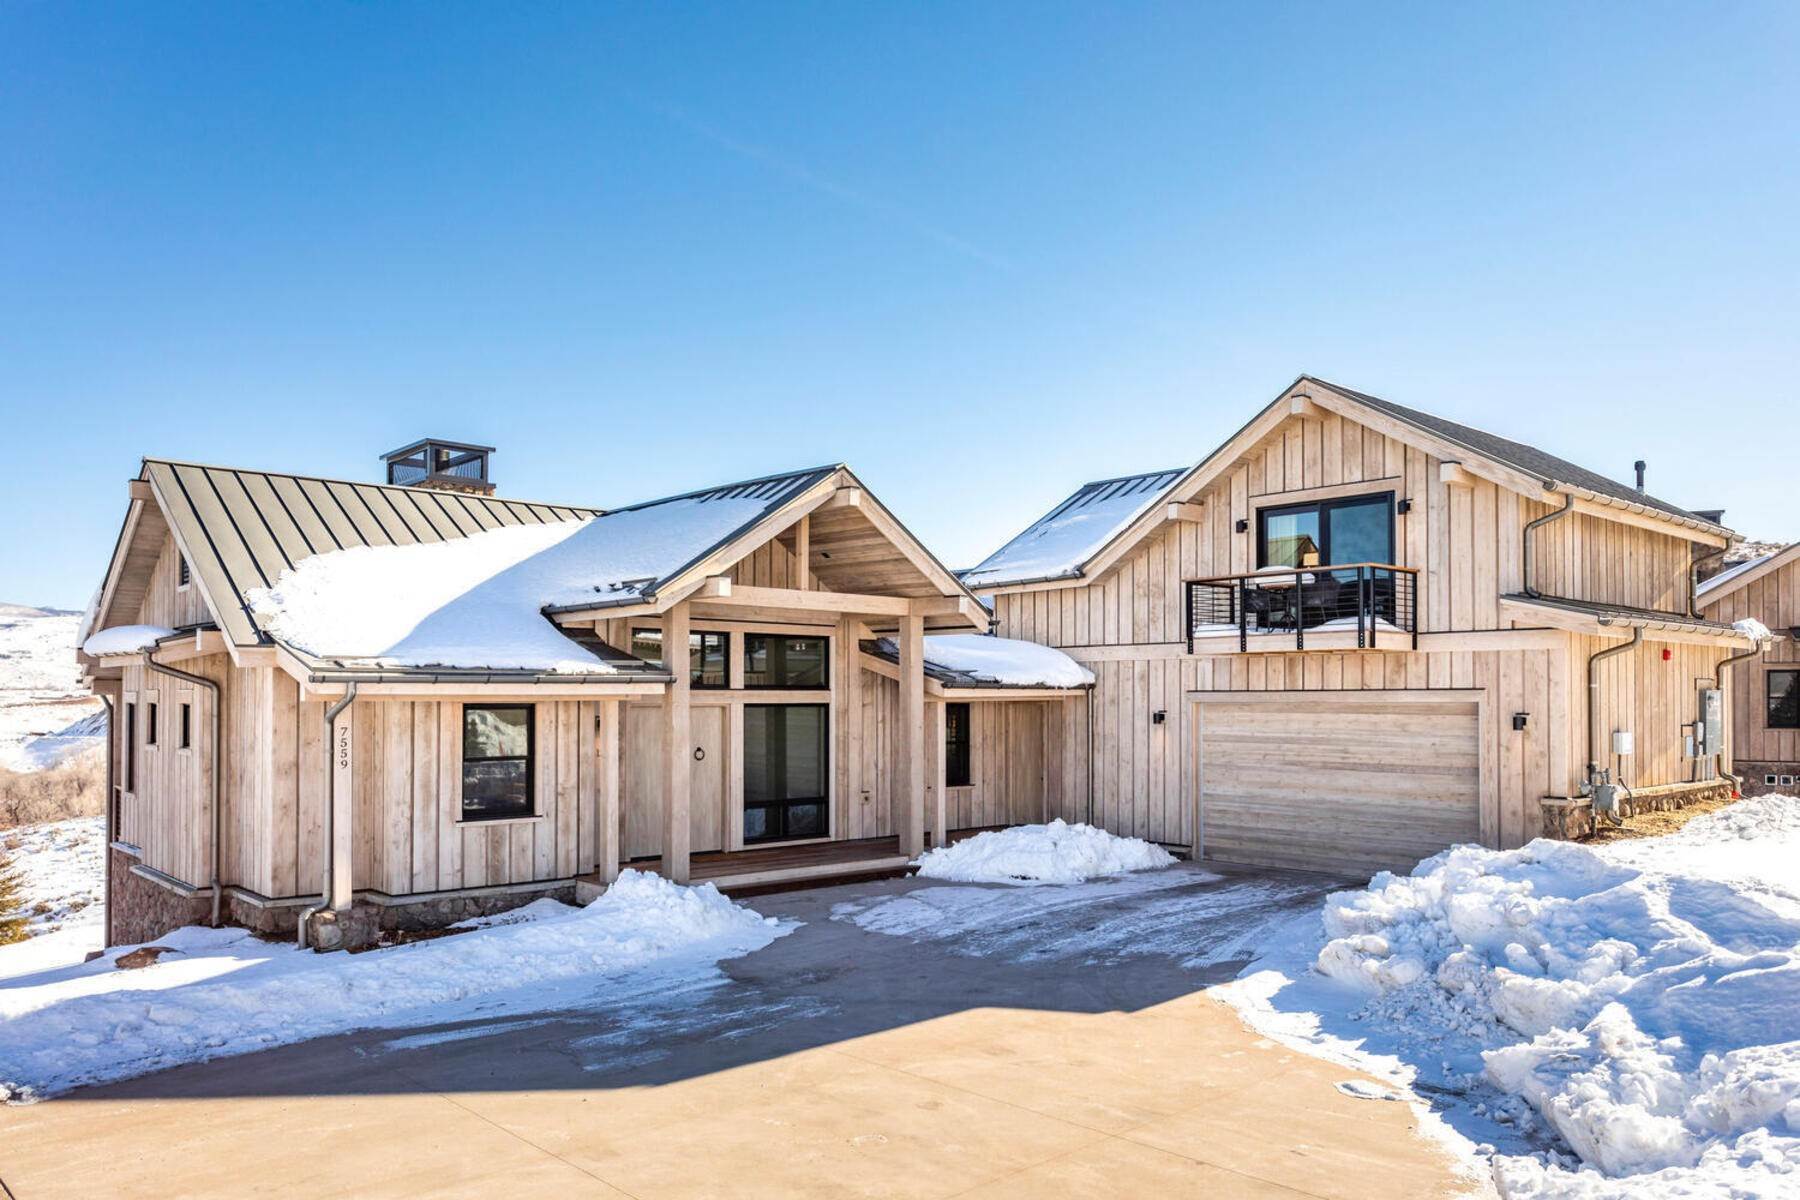 47. Fractional Ownership Property for Sale at Fractional 1/8th Ownership in the Kingfisher Cabin at the Residence Club at VR 7481 E. Moon Light Drive, 310G, 5.47 Heber City, Utah 84032 United States